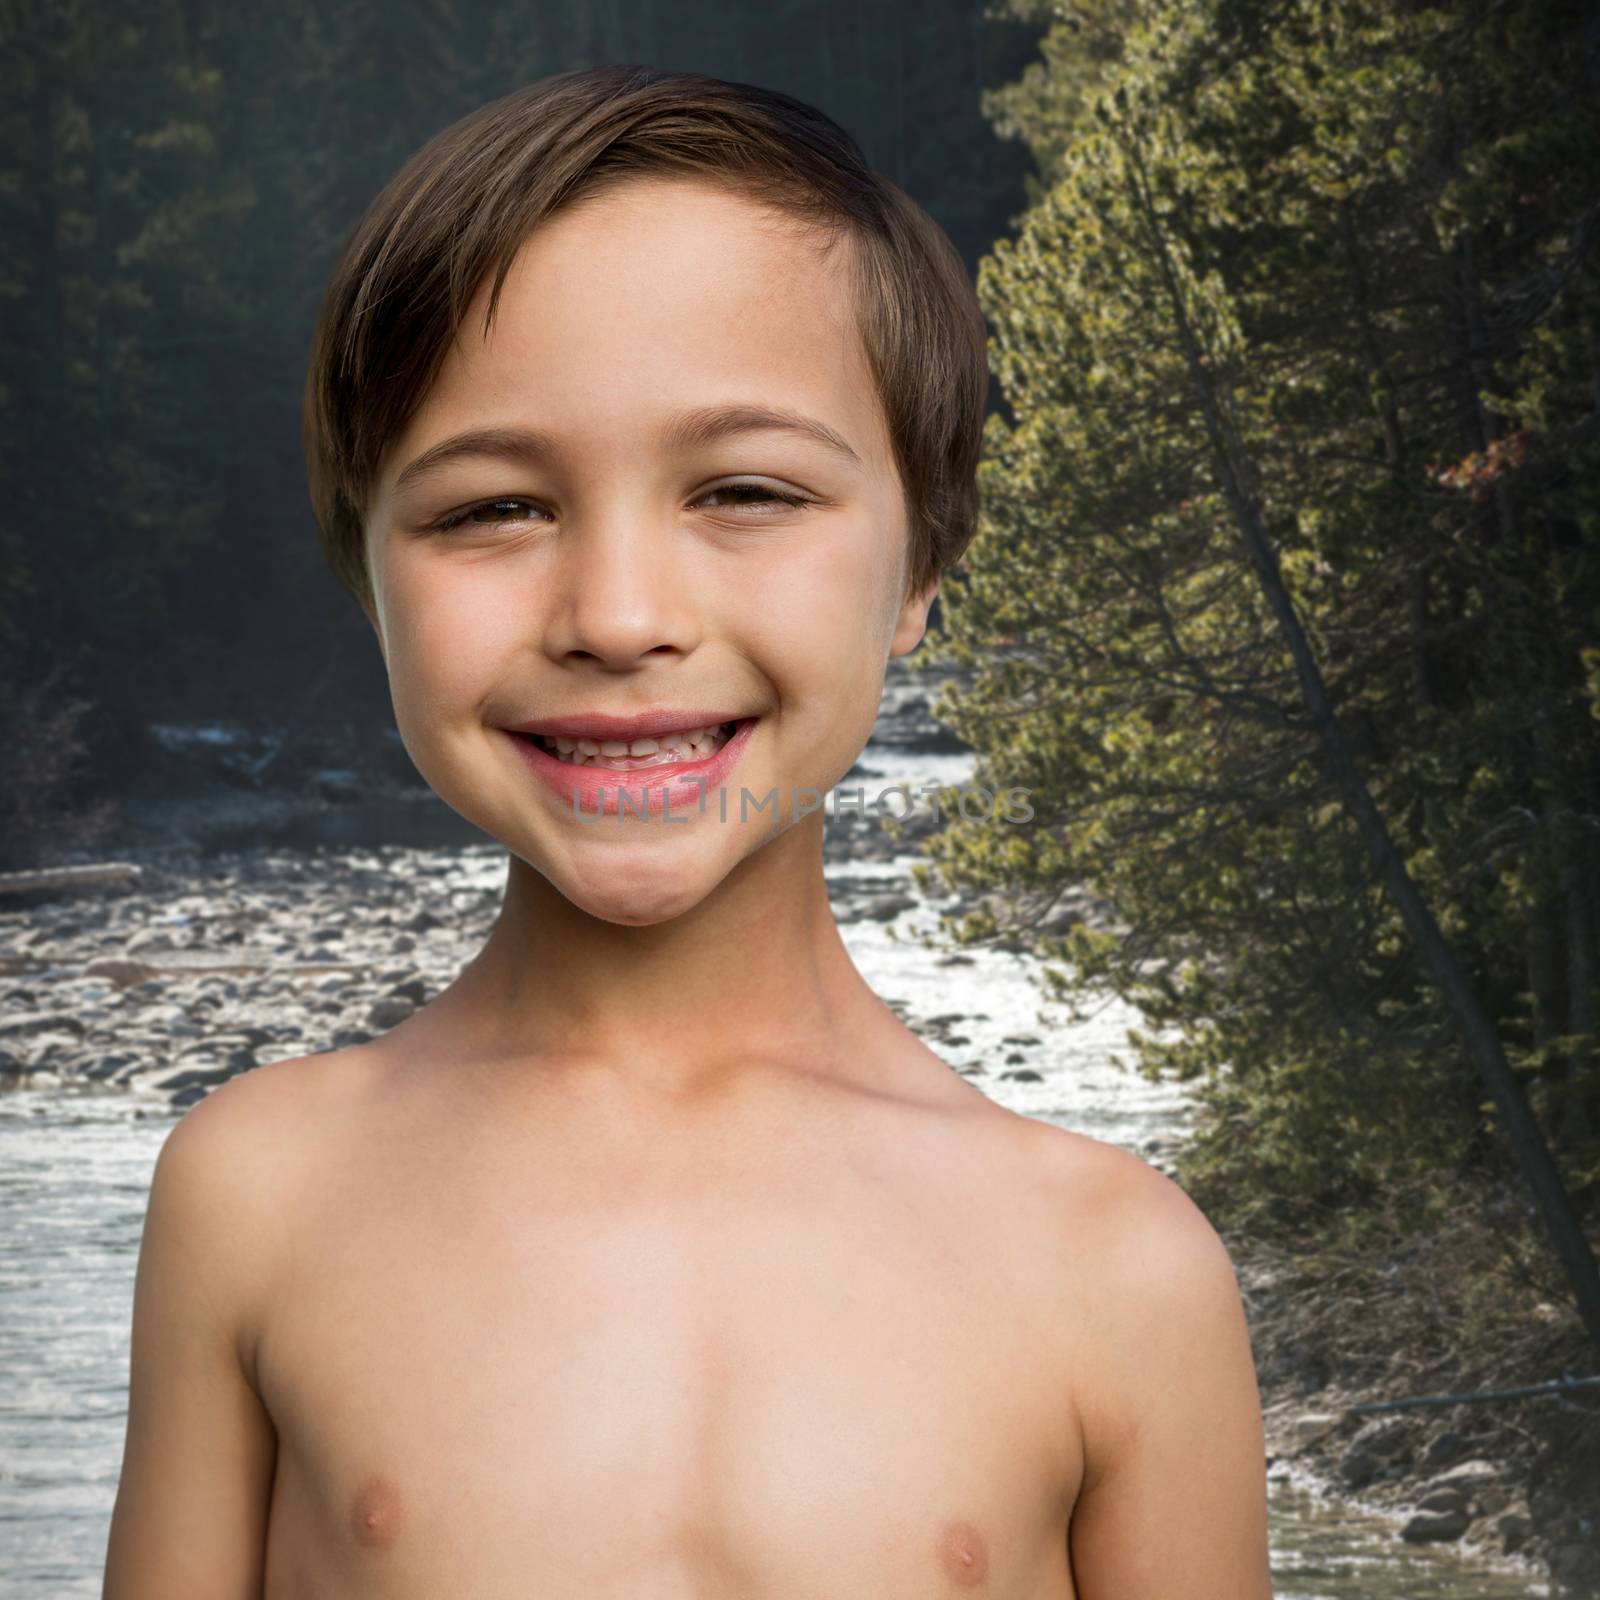 Composite image of close up of cheerful shirtless boy by Wavebreakmedia